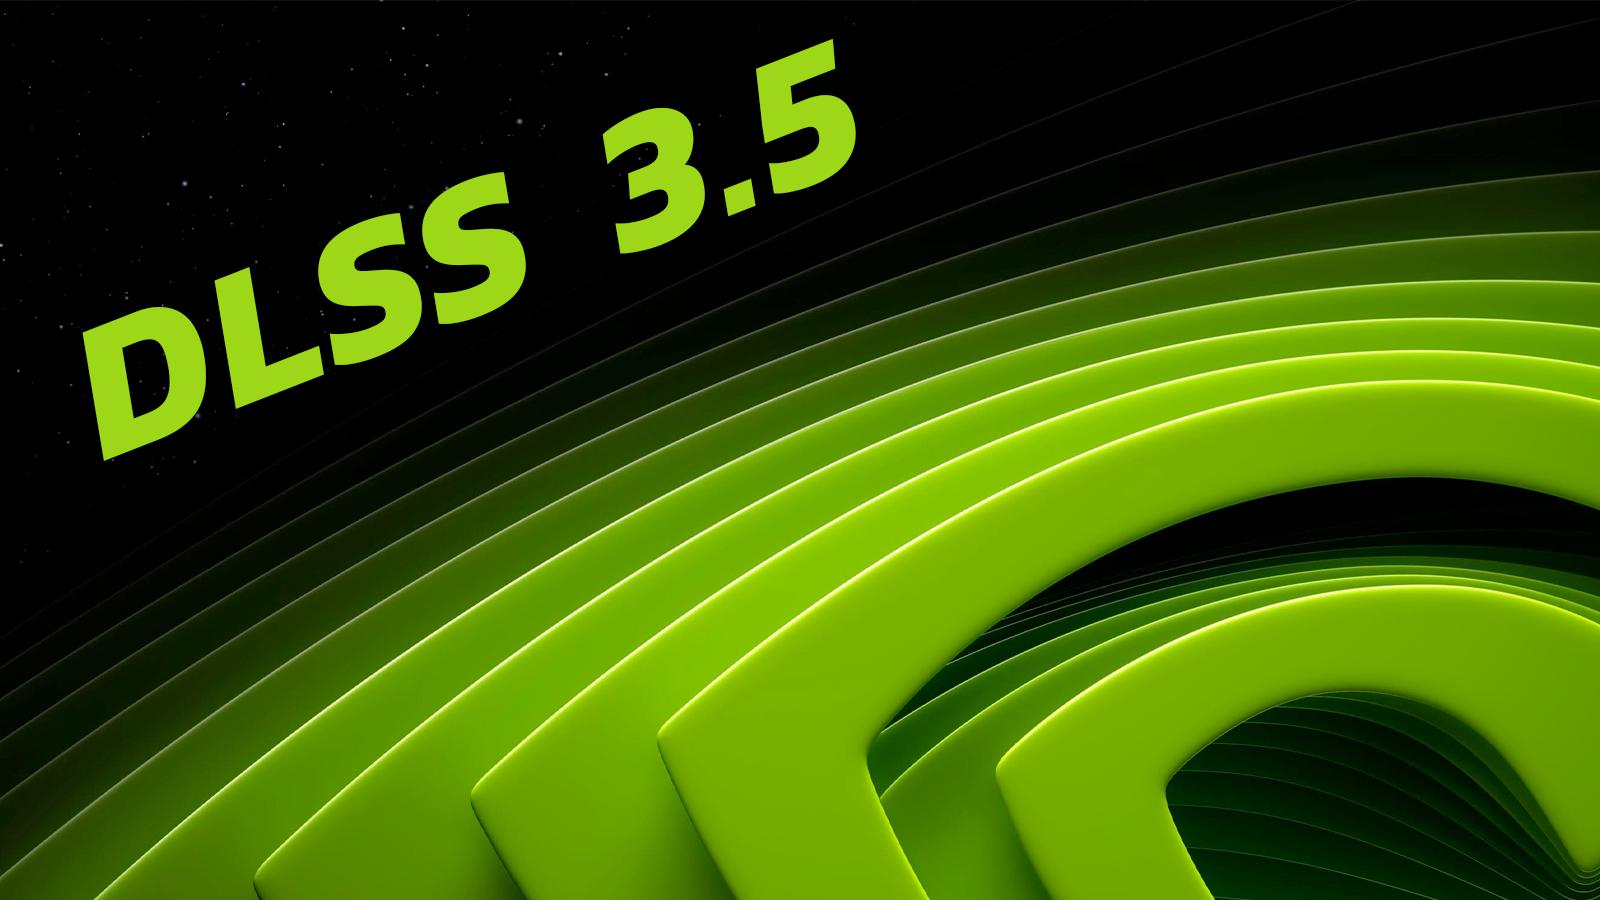 nvidia logo with dlss 3.5 written above